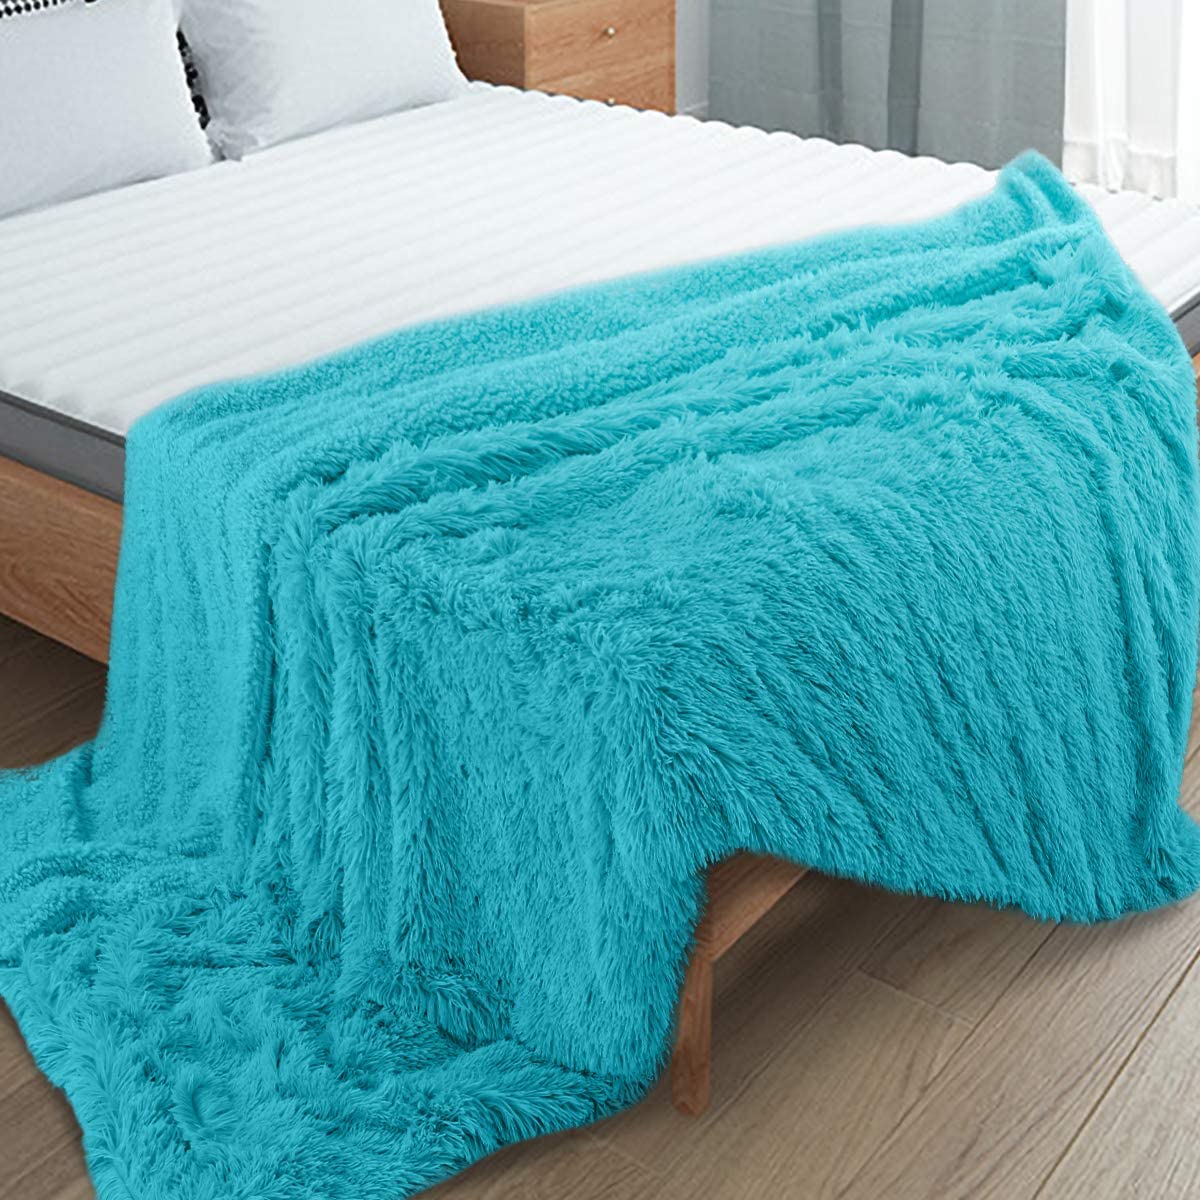 Cozy Double Layer Plush Winter Throw Blanket for Home Bedspread, Sofa Cover, Chair Towel, and Bed Decoration - Warm Lamb Bed Blankets and Throws